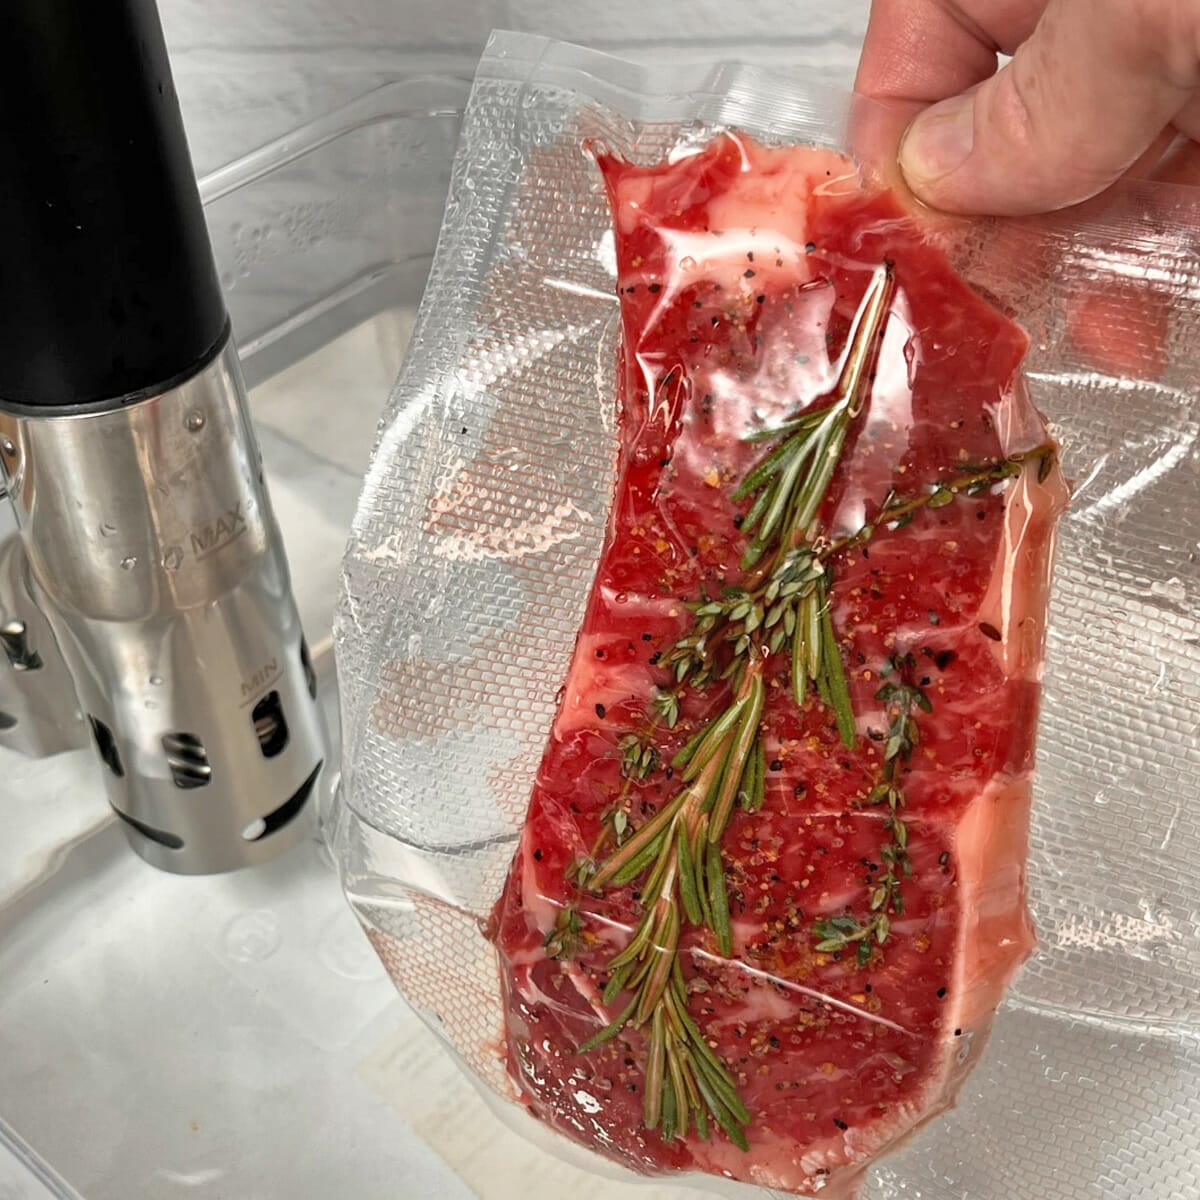 Sous Vide Cooking: How to Get Started